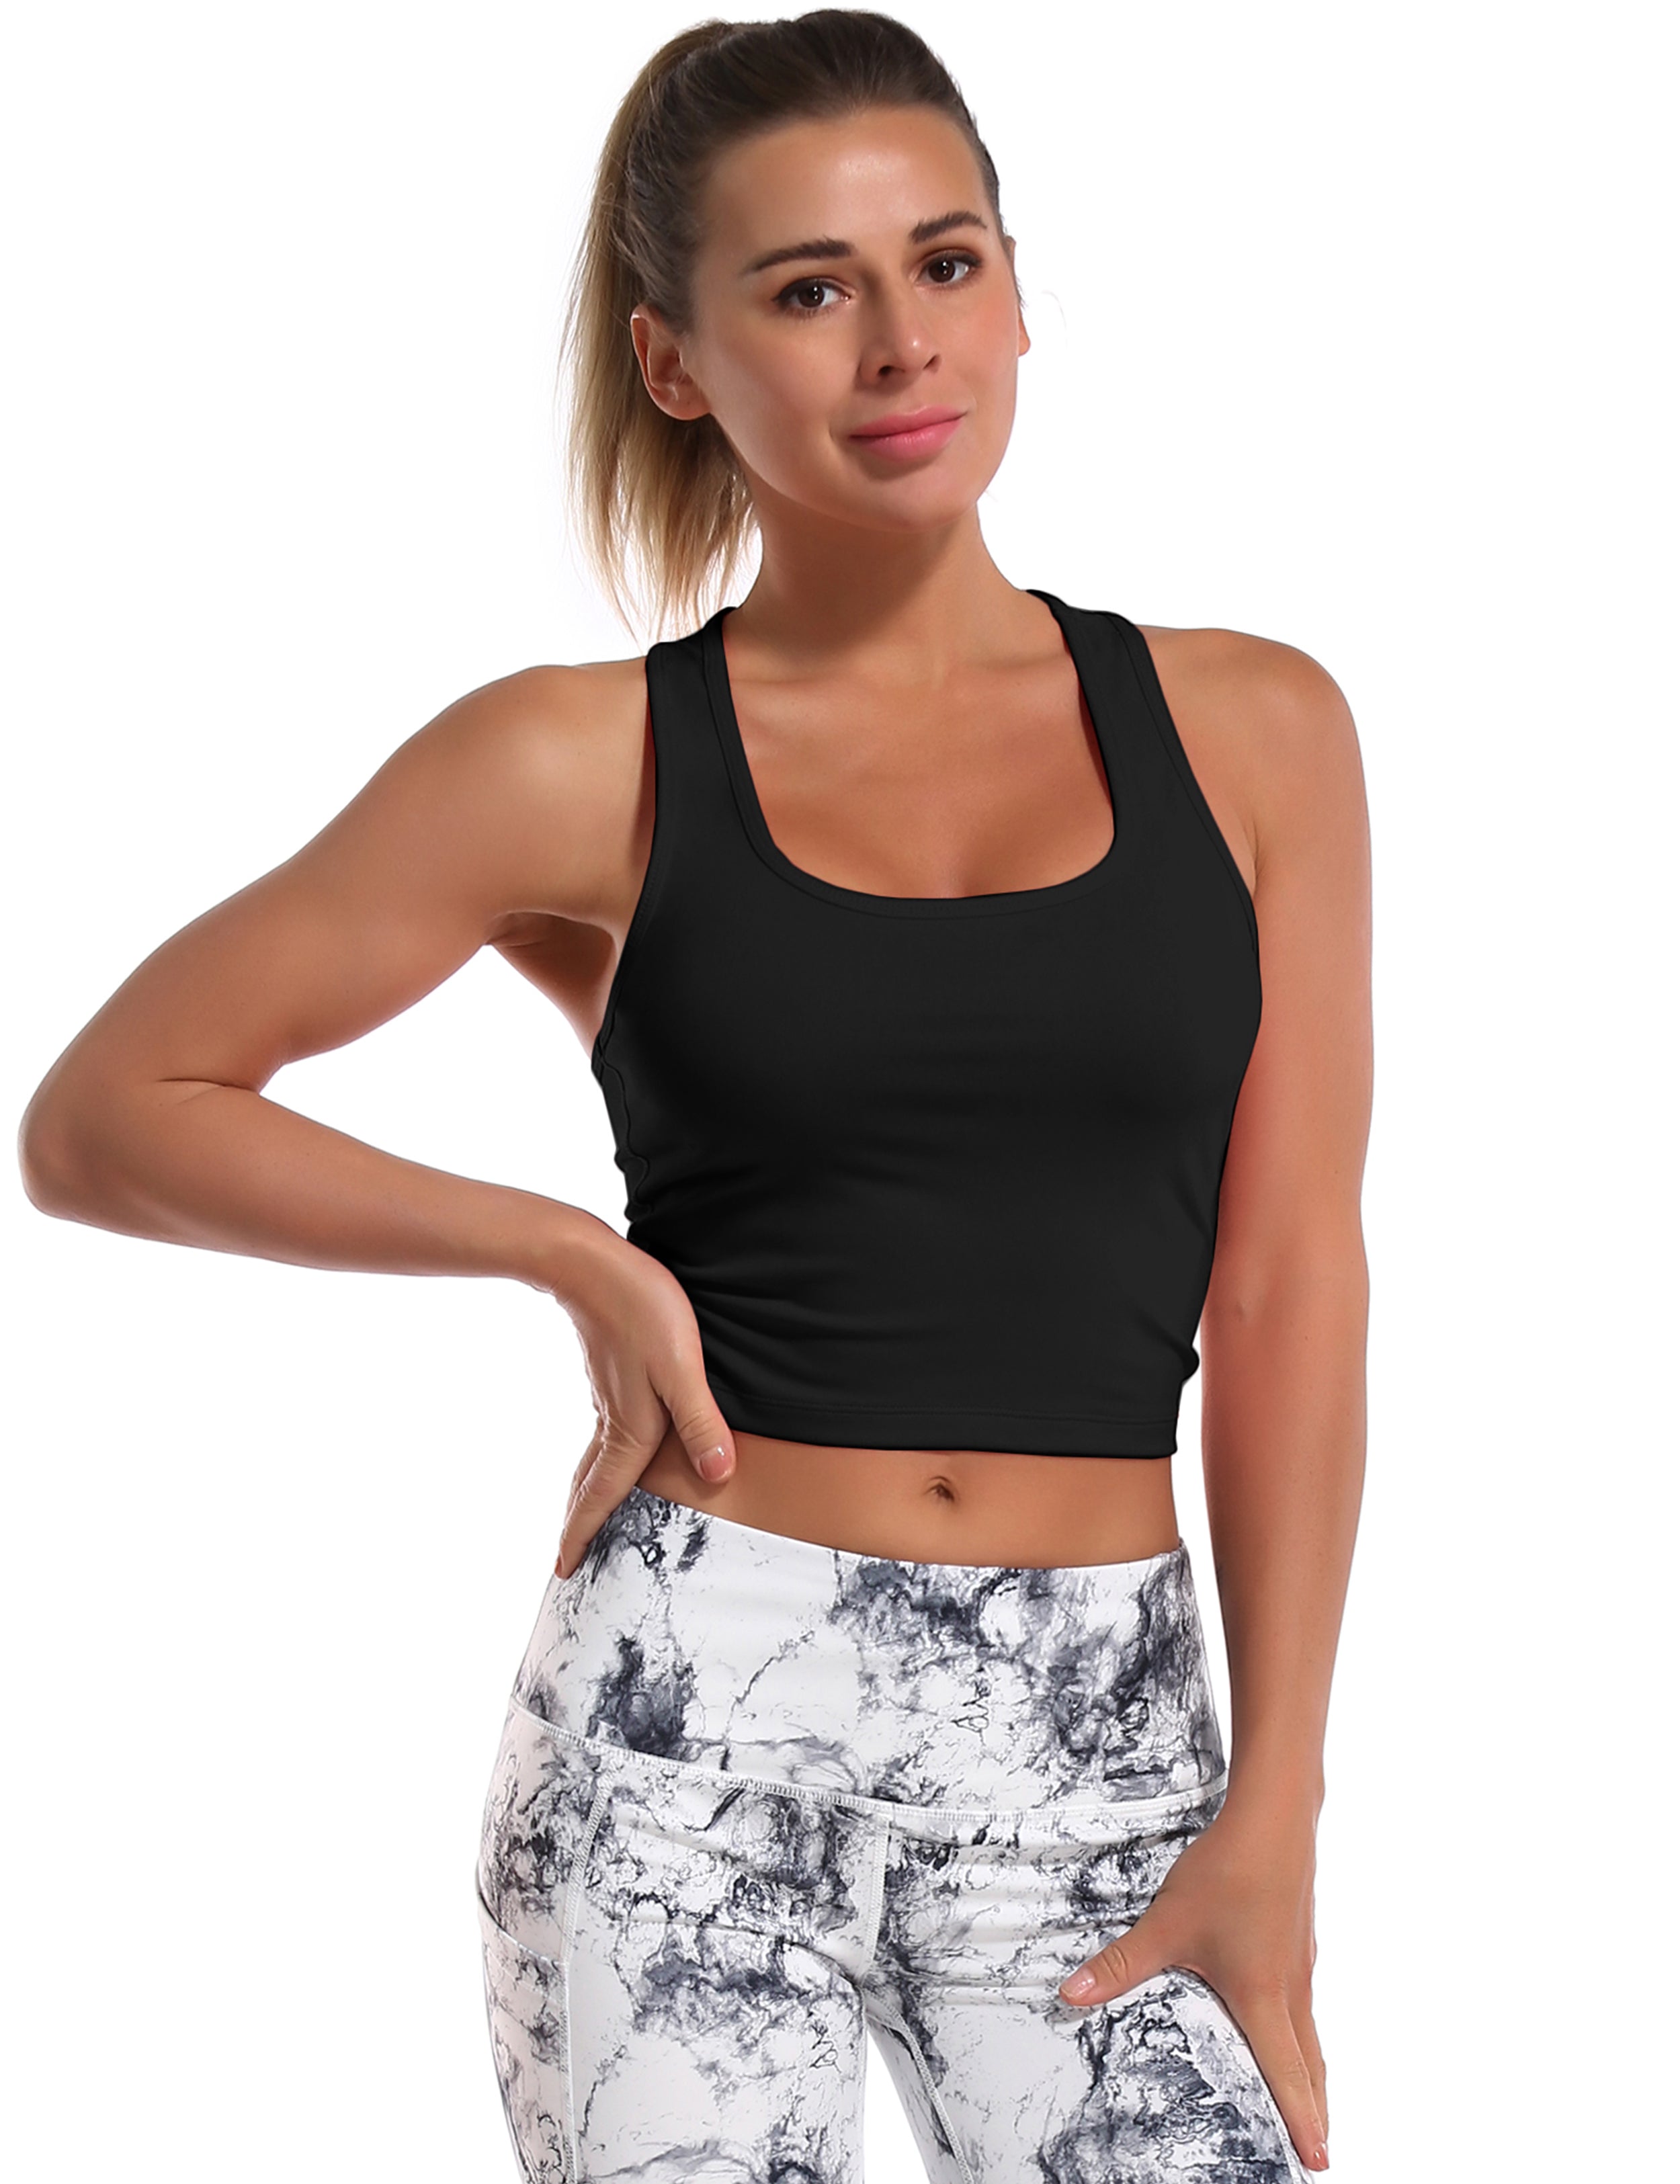 Racerback Athletic Crop Tank Tops black 92%Nylon/8%Spandex(Cotton Soft) Designed for Yoga Tight Fit So buttery soft, it feels weightless Sweat-wicking Four-way stretch Breathable Contours your body Sits below the waistband for moderate, everyday coverage